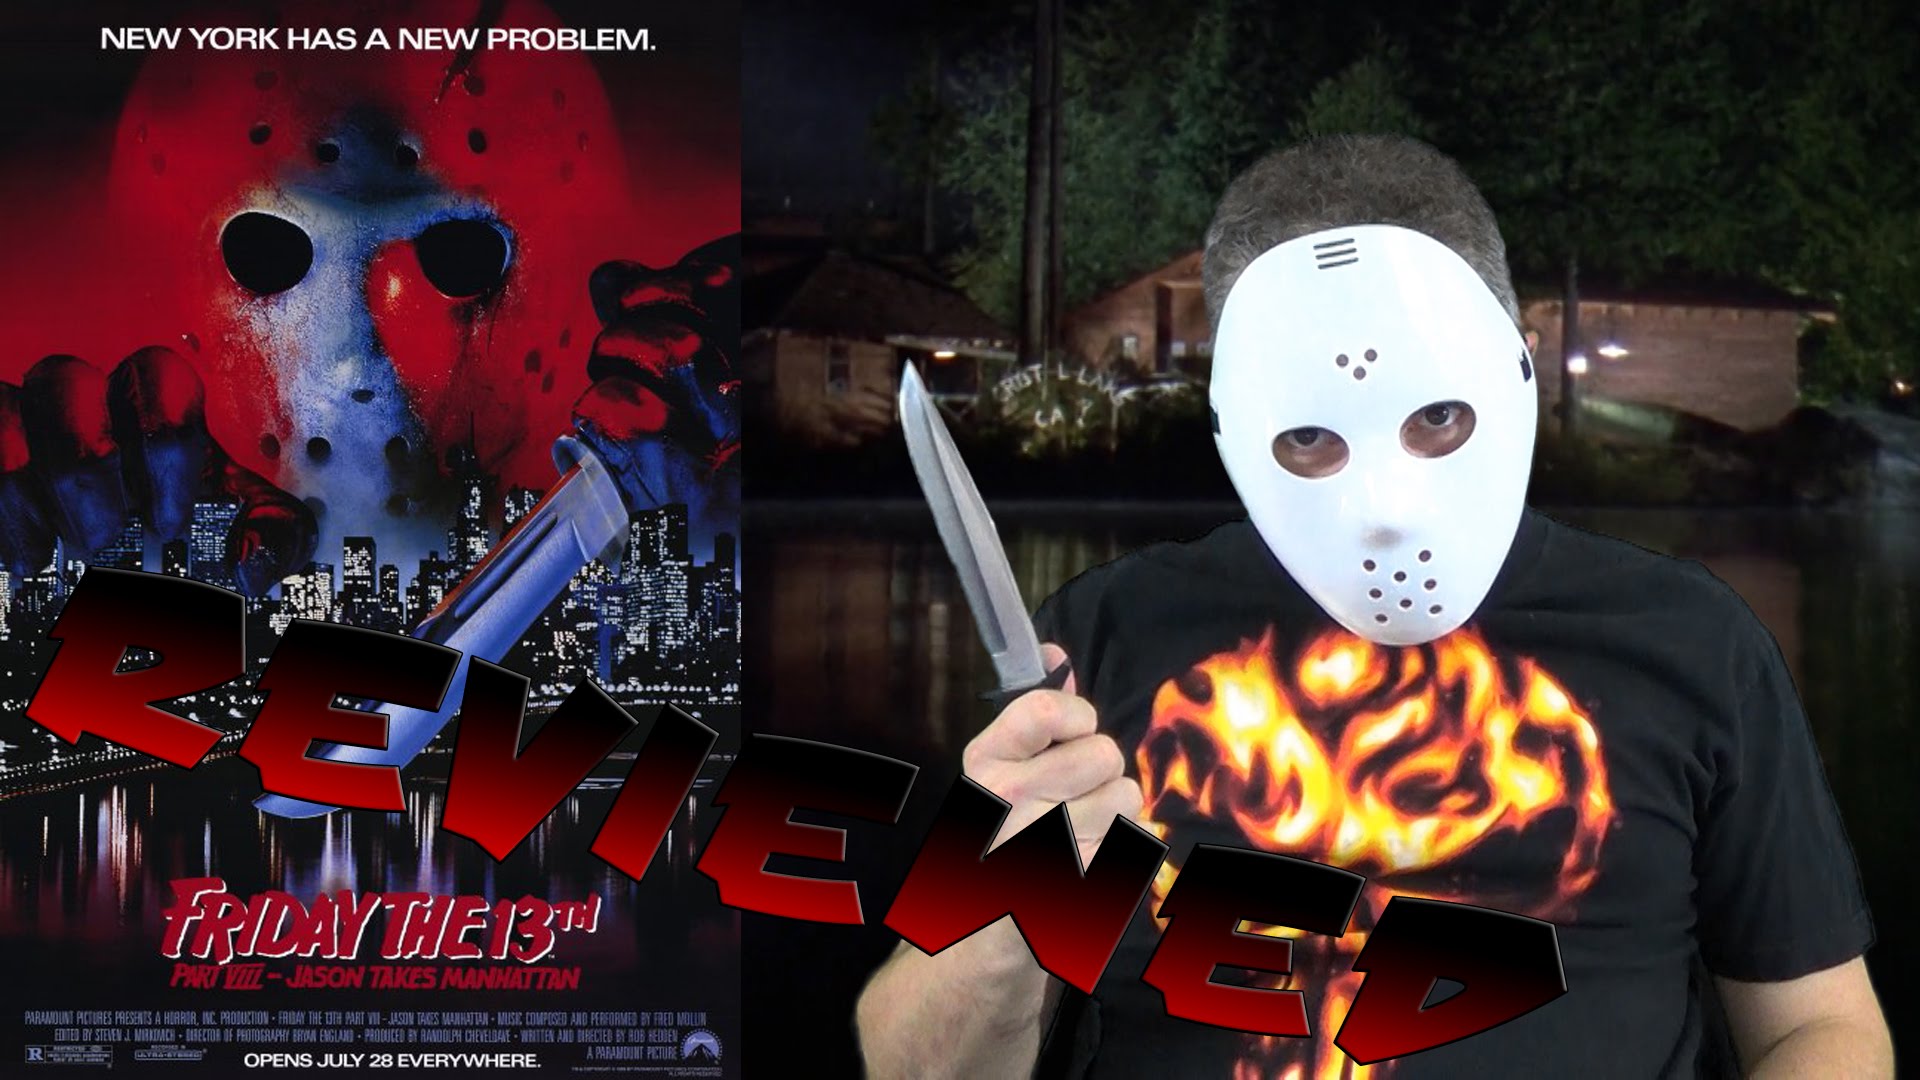 Friday The 13th Part VIII: Jason Takes Manhattan Backgrounds, Compatible - PC, Mobile, Gadgets| 1920x1080 px